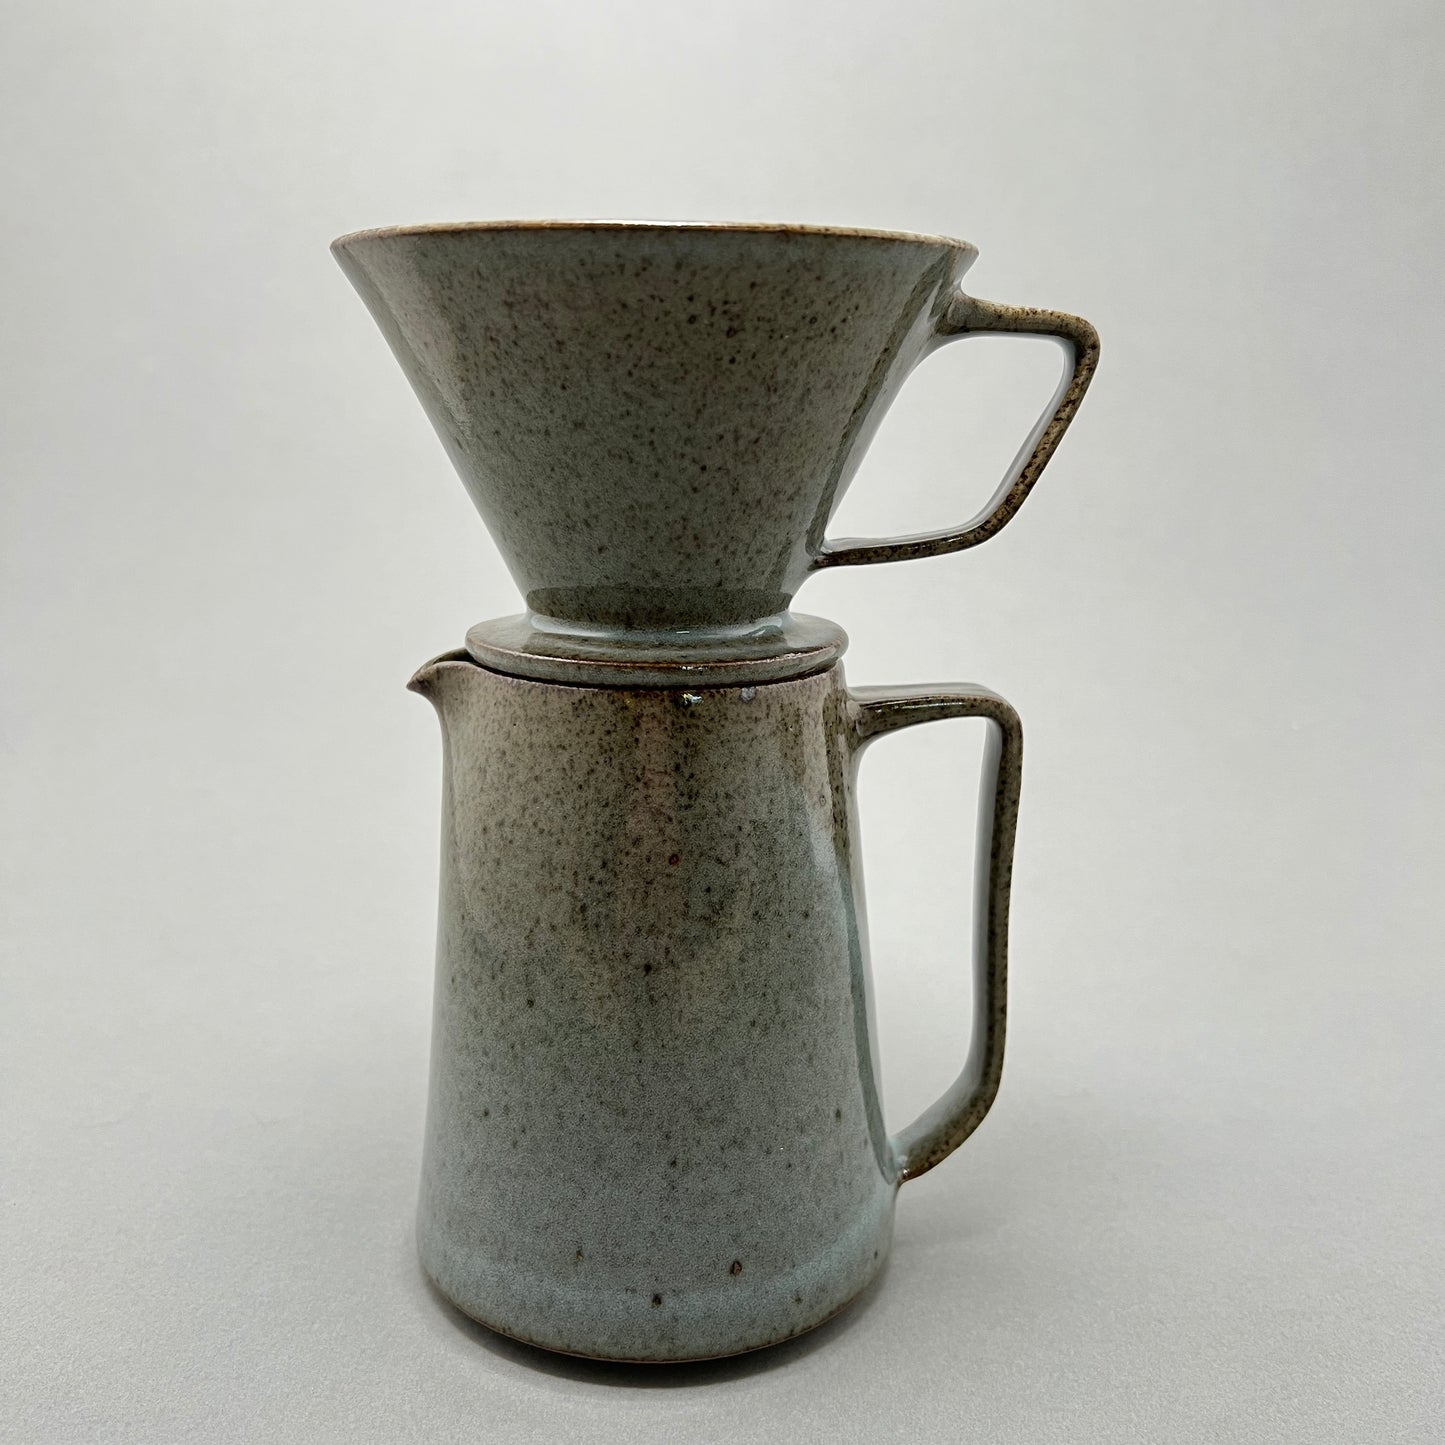 A sage green ceramic coffee pitcher standing on a gray background